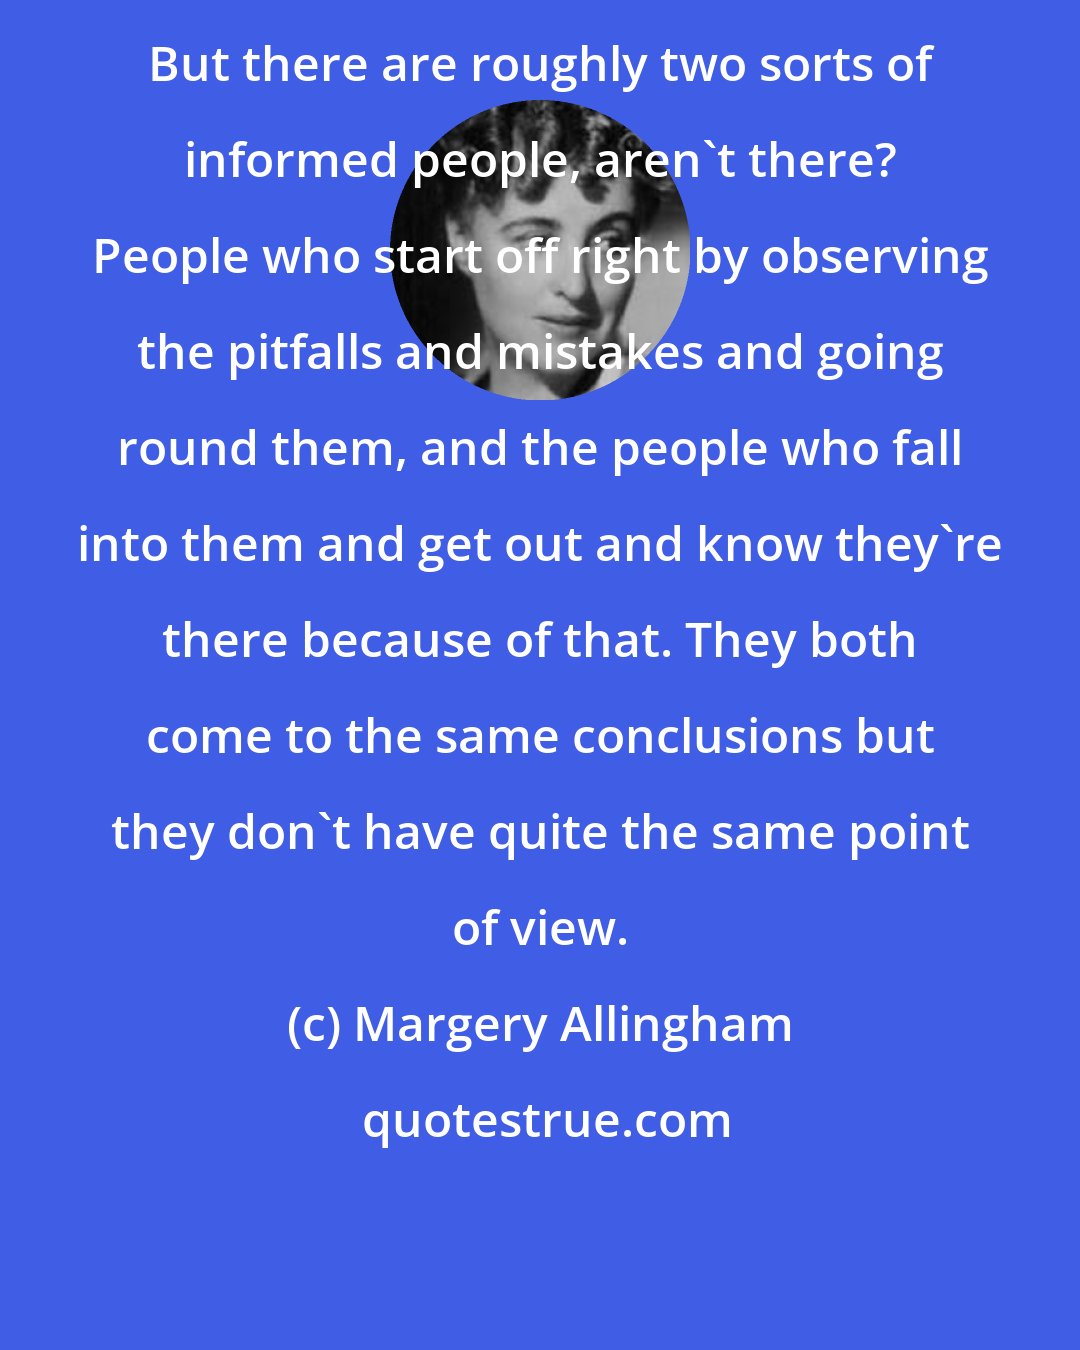 Margery Allingham: But there are roughly two sorts of informed people, aren't there? People who start off right by observing the pitfalls and mistakes and going round them, and the people who fall into them and get out and know they're there because of that. They both come to the same conclusions but they don't have quite the same point of view.